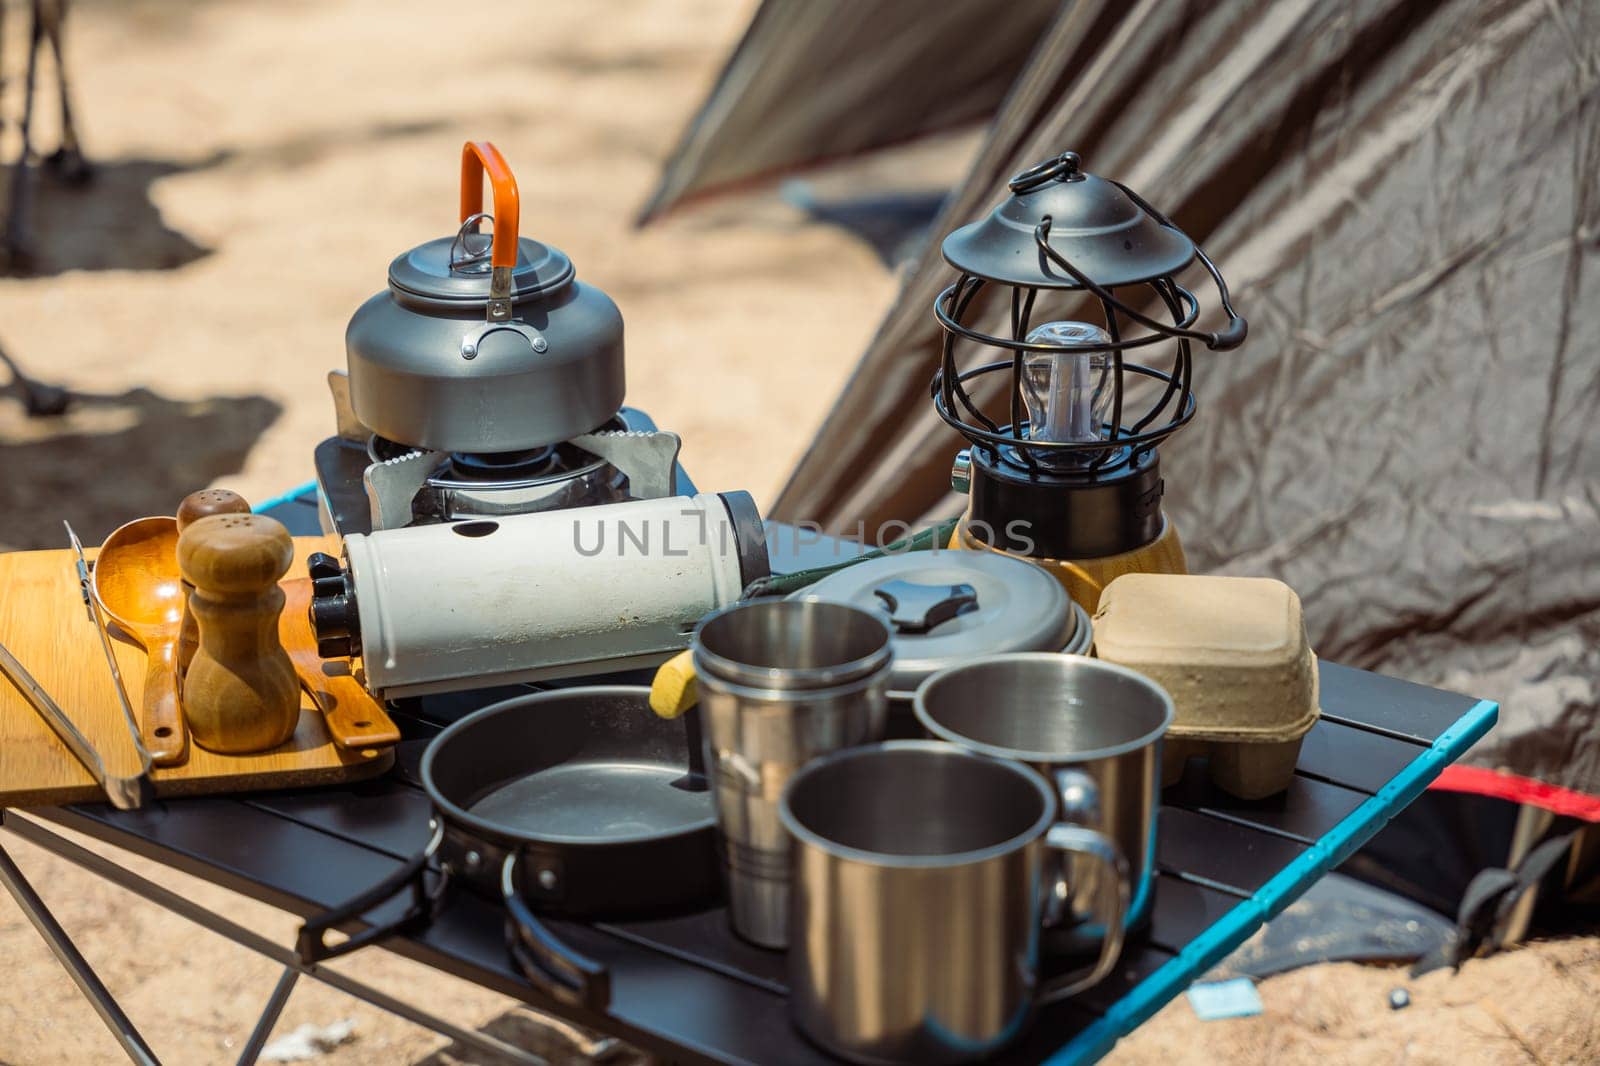 A picturesque morning at the campsite, essential cooking equipment, kettle, pot, pan, gas stove, and camera, set up by the tent. Camping in nature has never been more delightful. by Sorapop